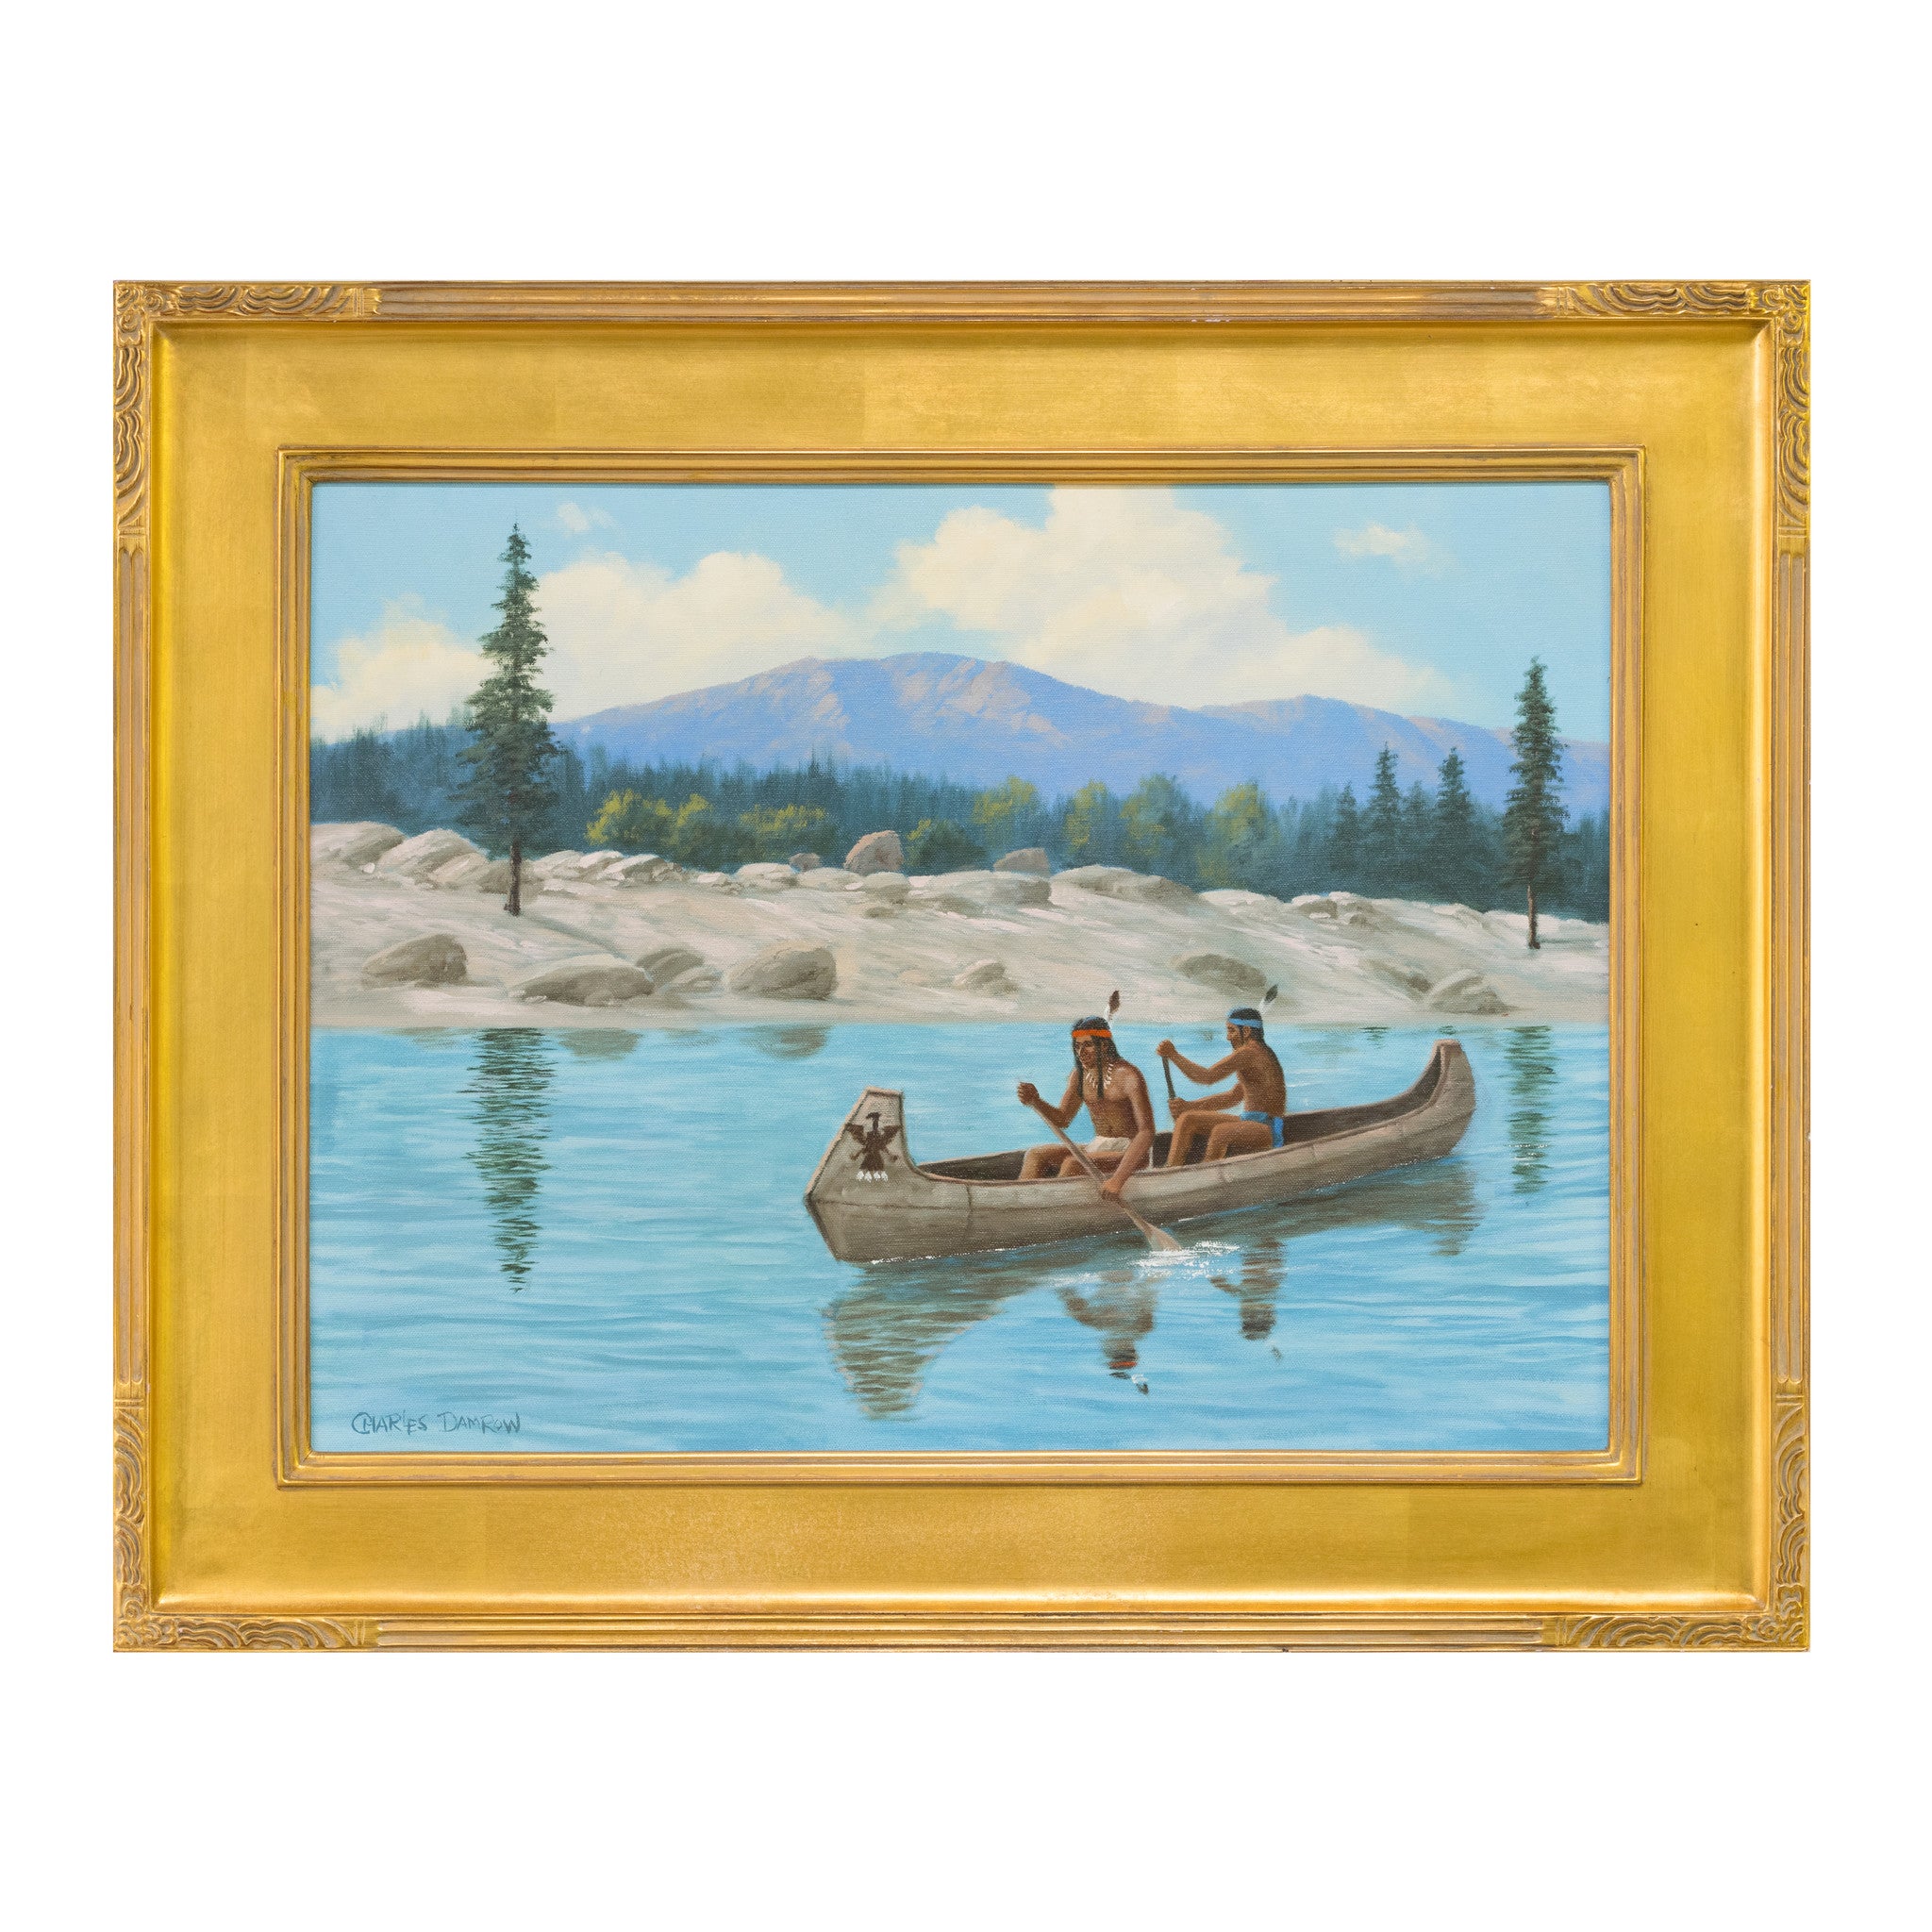 Native Americans in Canoe by Charles Damrow